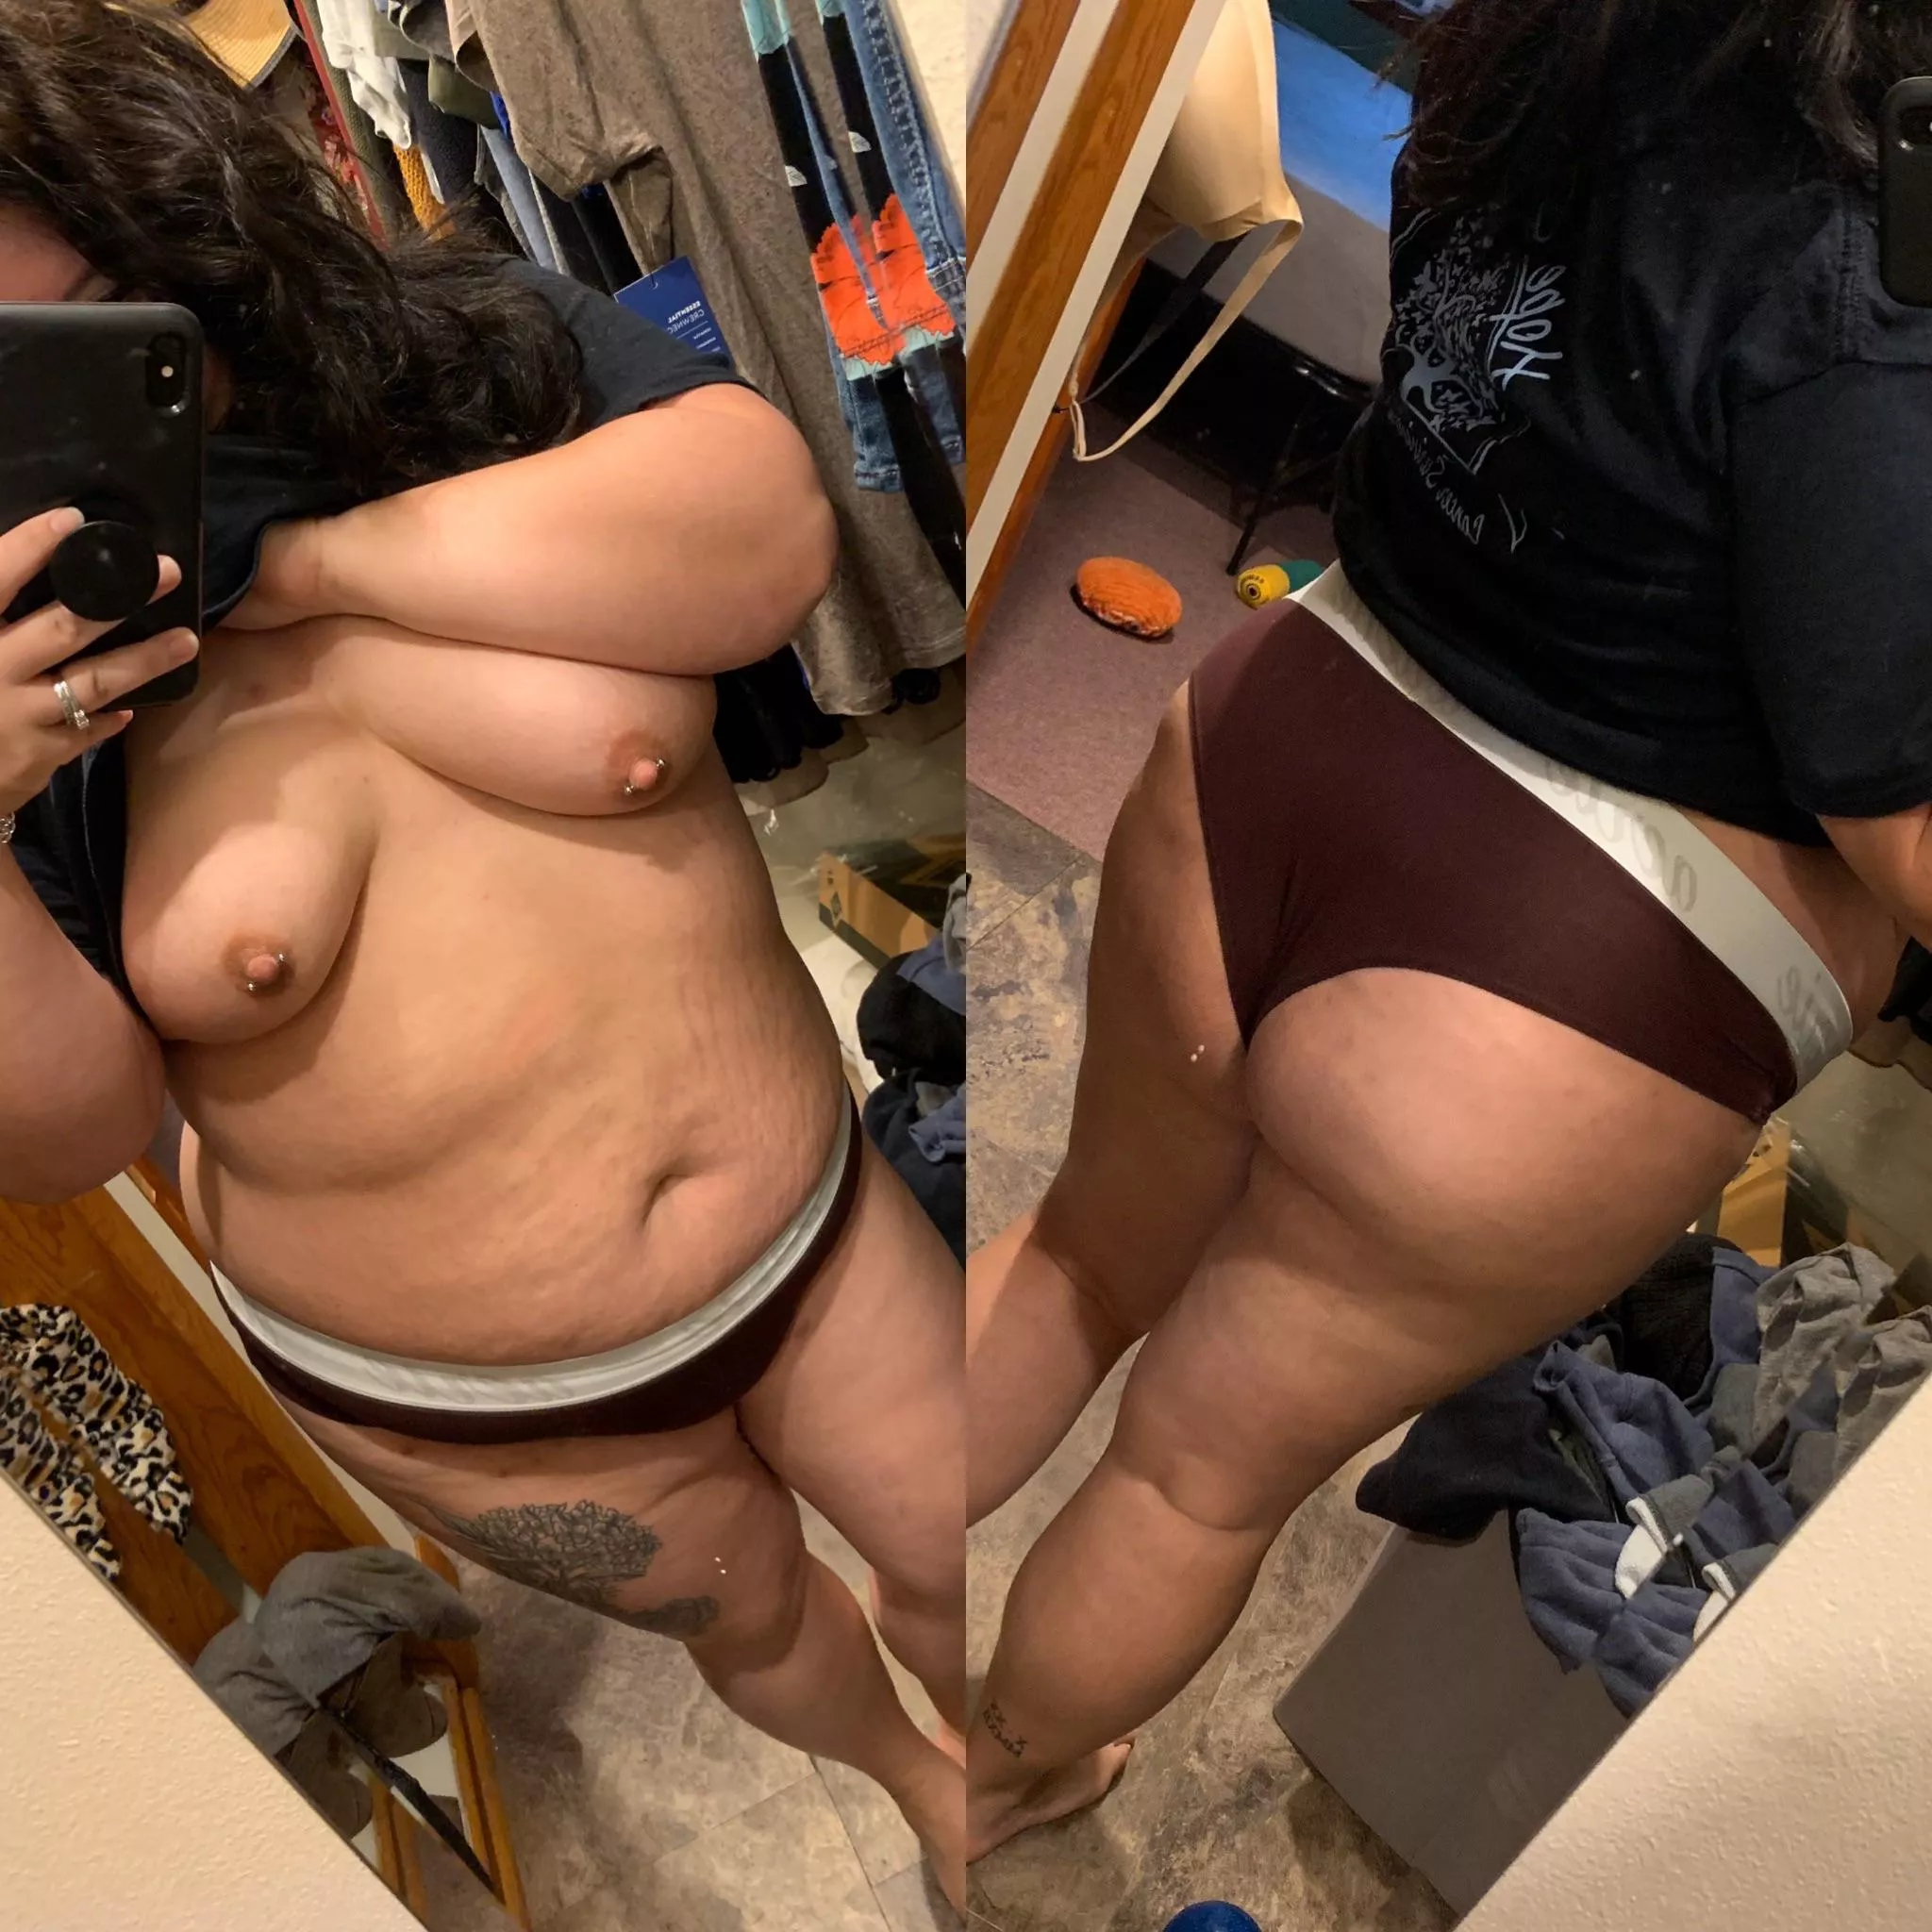 Anyone looking to trade and stroke together? This is my super sexy 29 year old bbw wife. Show offs and bi a plus. Sample gets reply, Kik is sihank2019